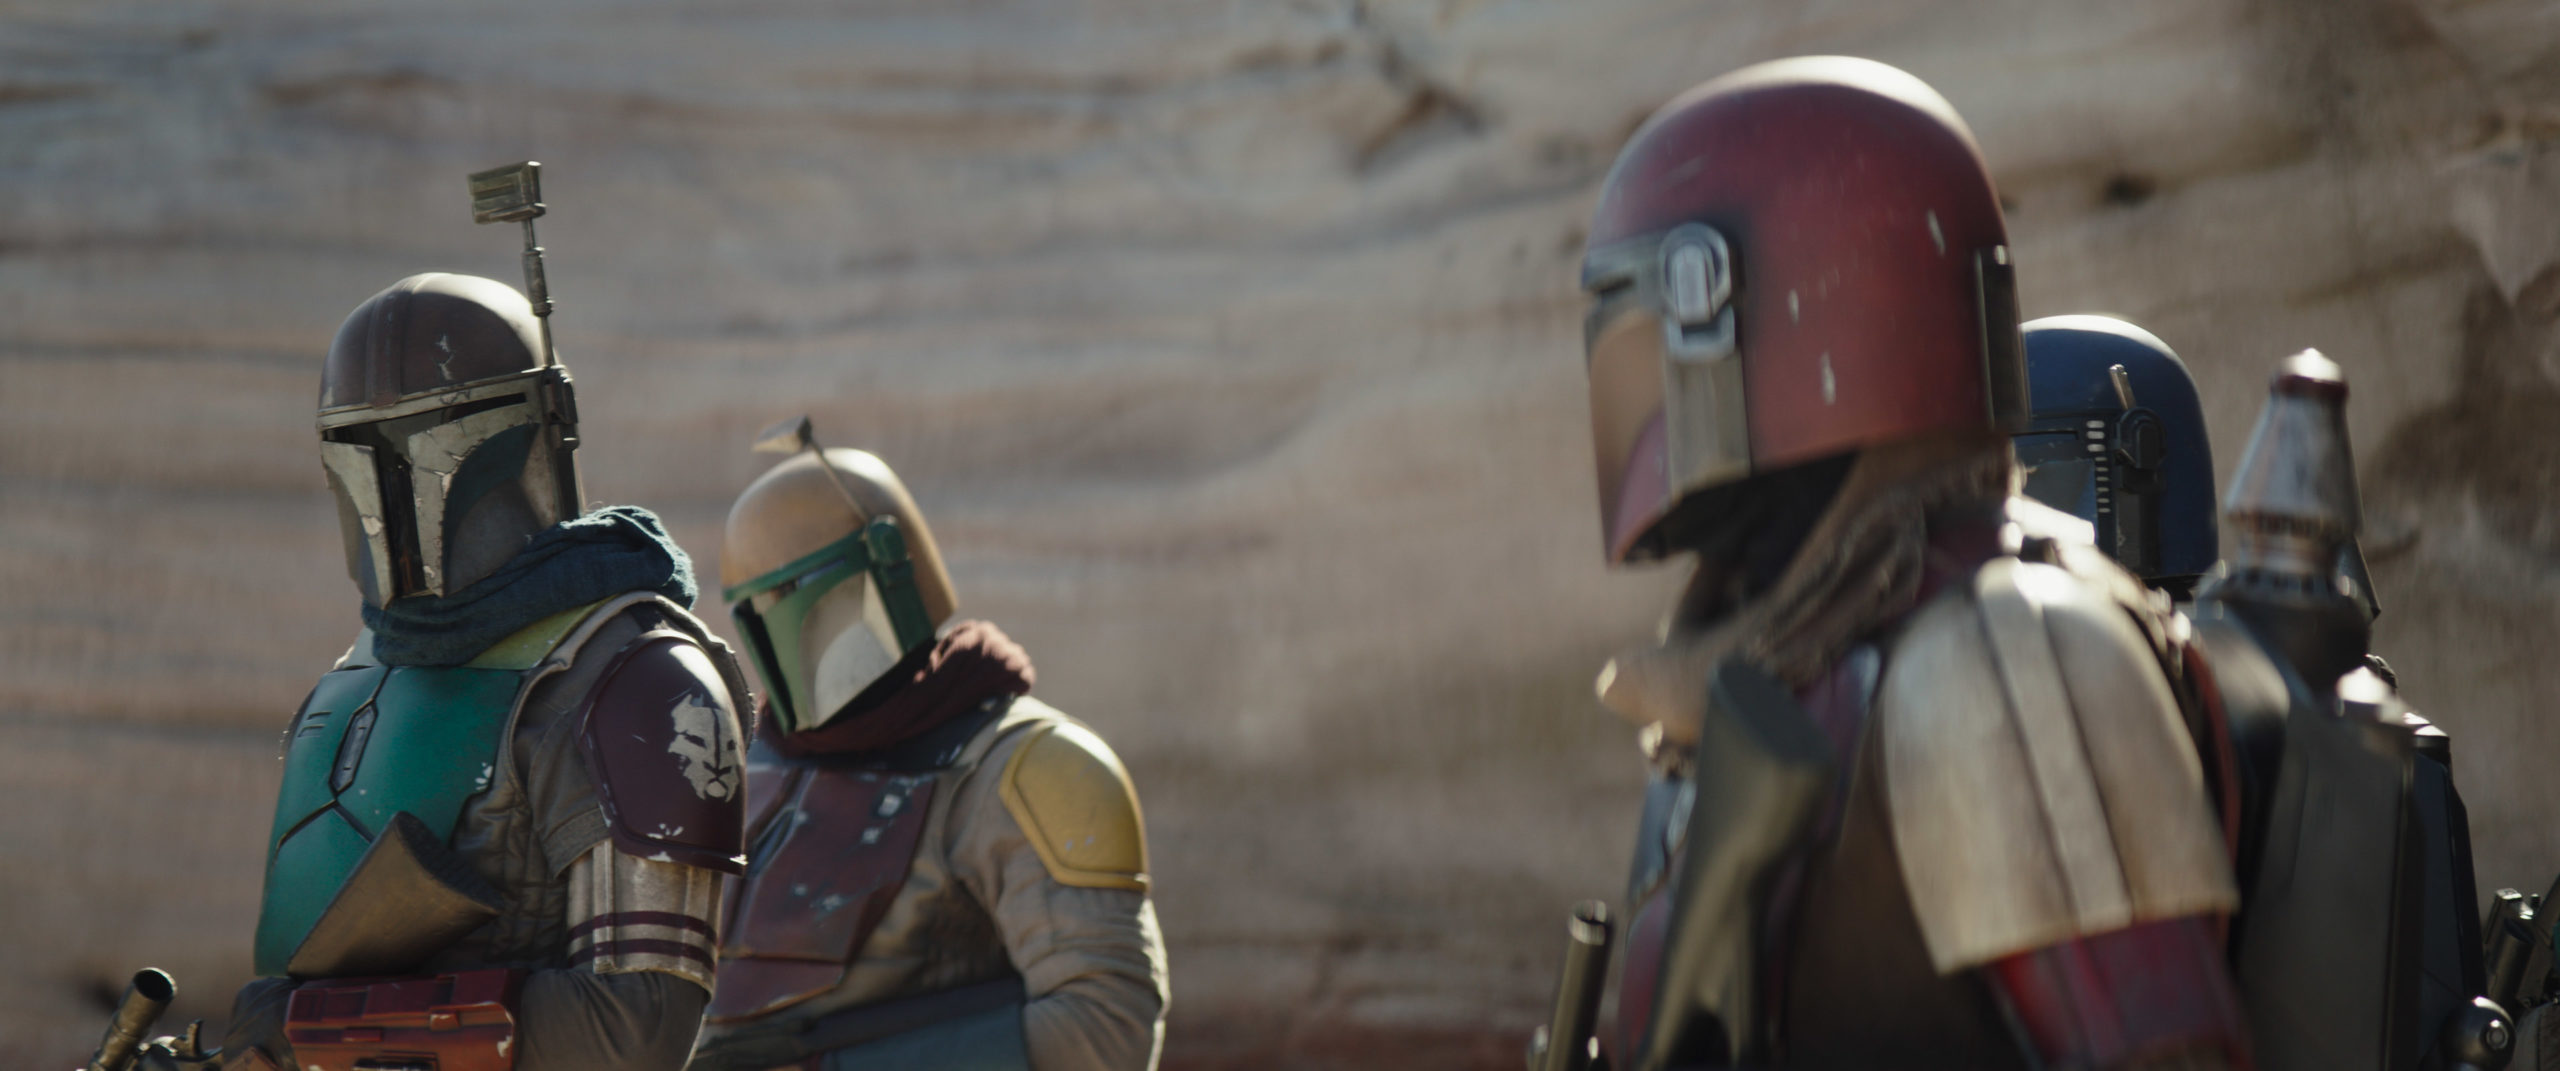 According to the latest buzz around The Mandalorian, Episode 3 of Season 3 is set to be the longest episode yet.